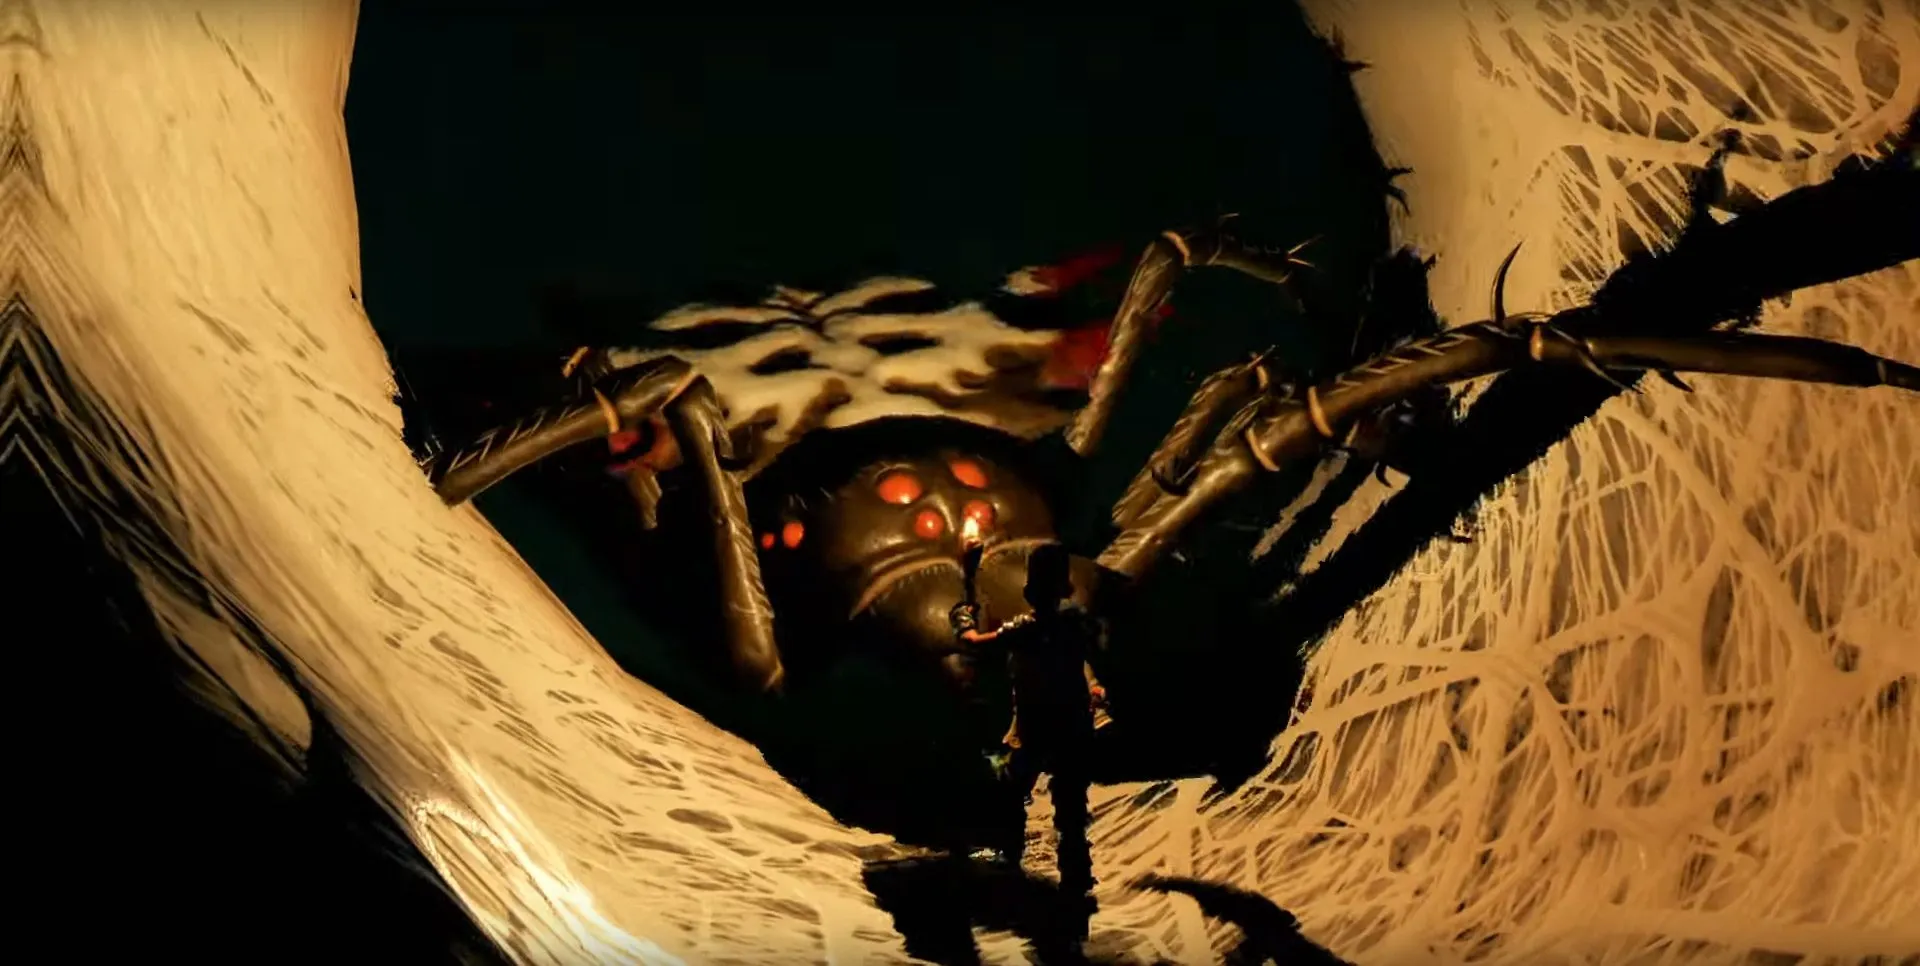 Grounded S Shroom And Doom Update Has A Bigger Freakier Spider